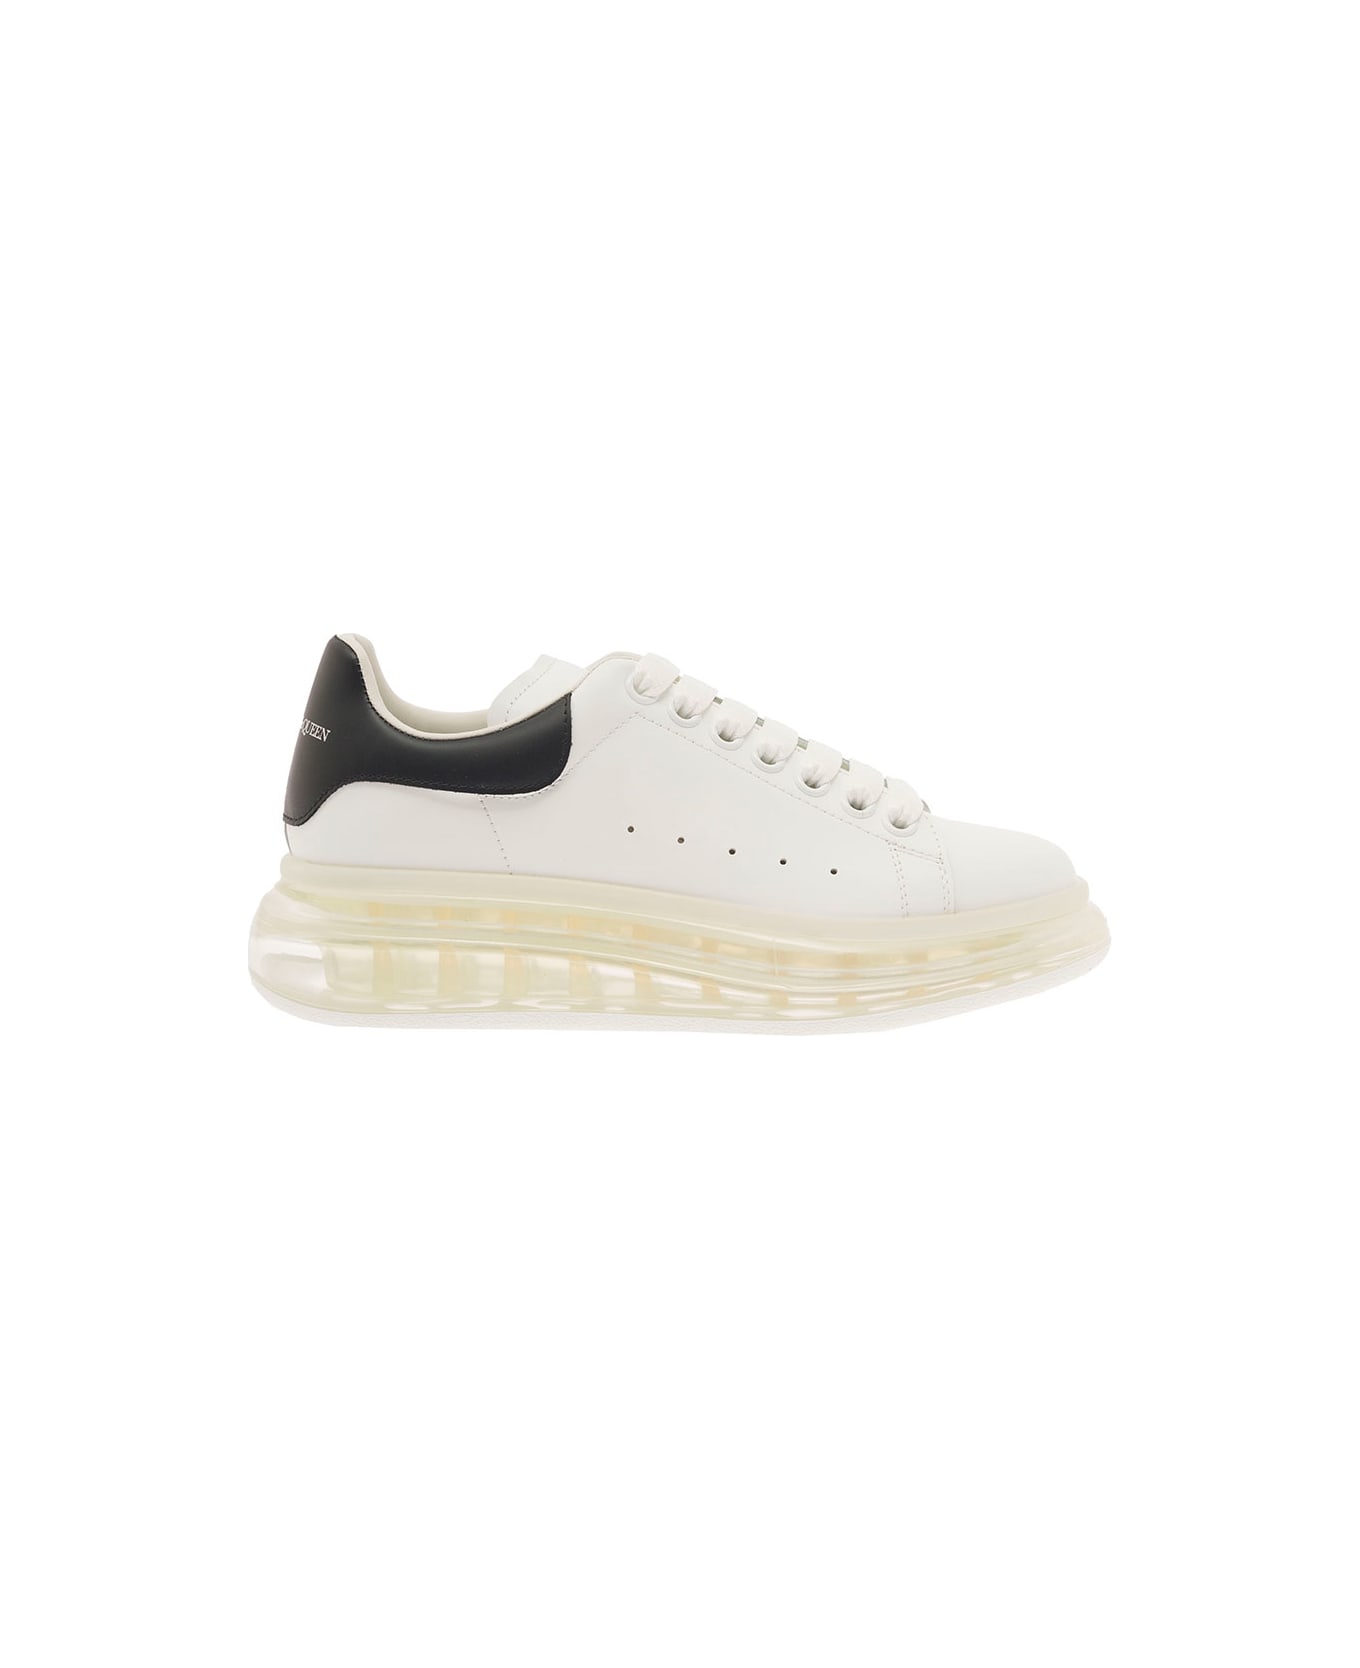 Alexander McQueen Transaparent Big Sole White Sneakers In Leather Man - White ウェッジシューズ